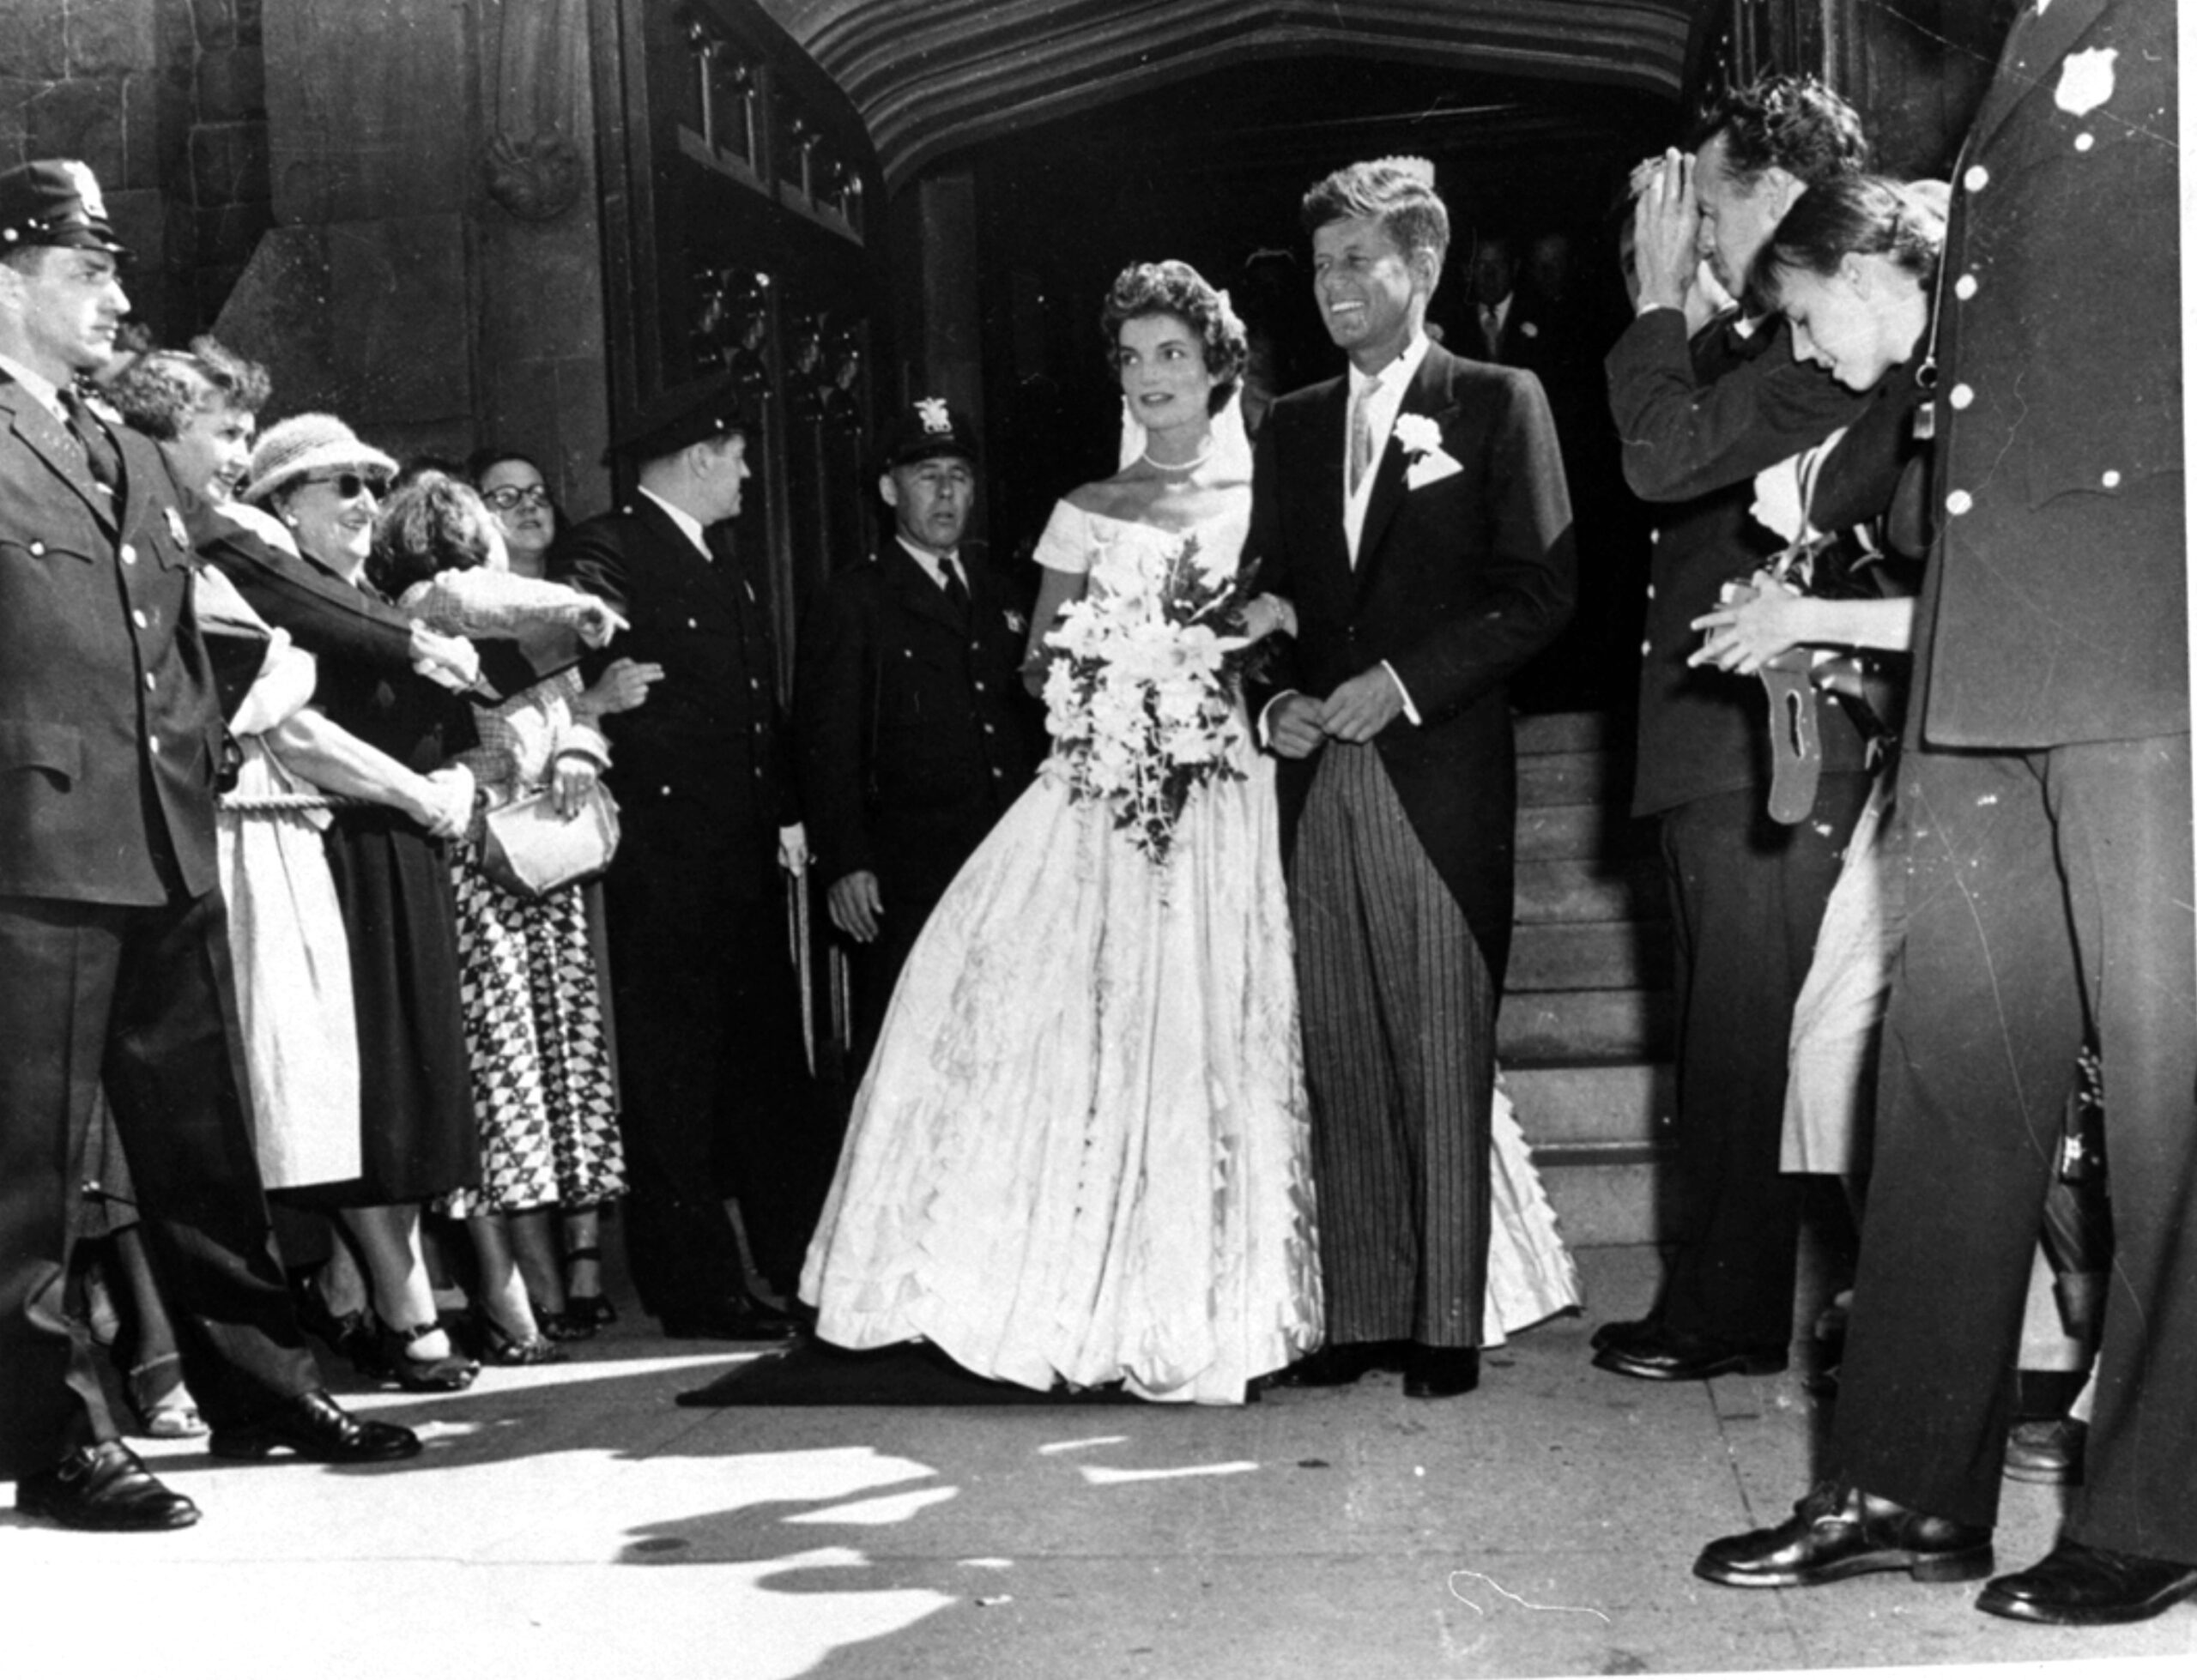 Archival and breaking-news images from AP are part of its new distribution agreement with Shutterstock Editorial. Above, Sen. John F. Kennedy, D-Mass., is shown with his bride, the former Jacqueline Bouvier, leaving a Newport, Rhode Island church after their wedding on Sept. 12, 1953. (AP Photo) Below, New England Patriots quarterback Tom Brady, left, and Denver Broncos quarterback Peyton Manning speak following the AFC championship game Sunday, Jan. 24, 2016, in Denver. (AP Photo/David Zalubowski)